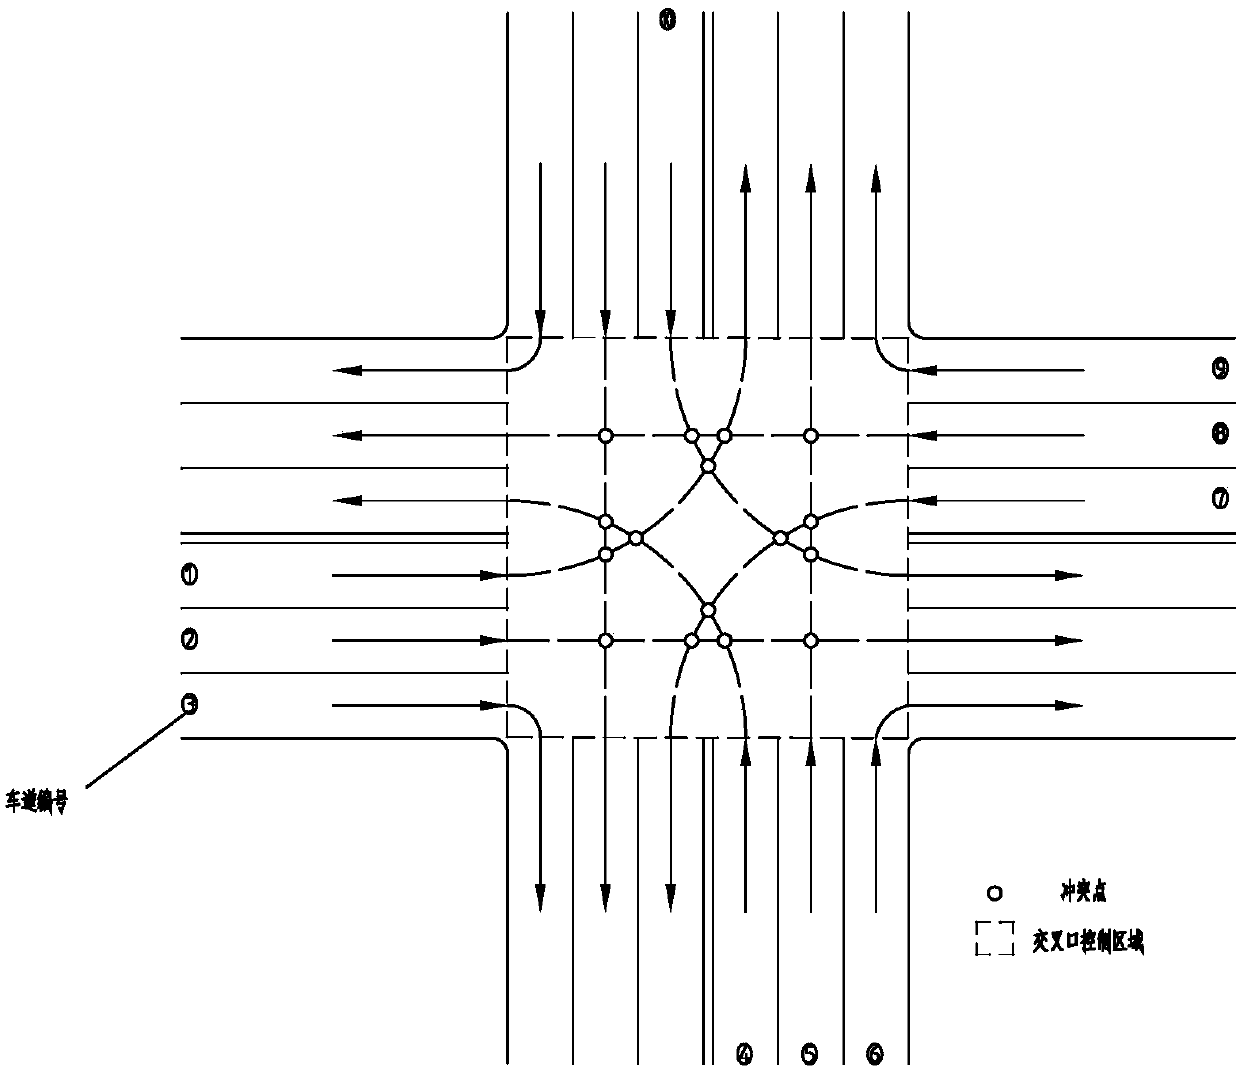 Vehicle scheduling method in intersection region under Internet-of-Vehicles environment